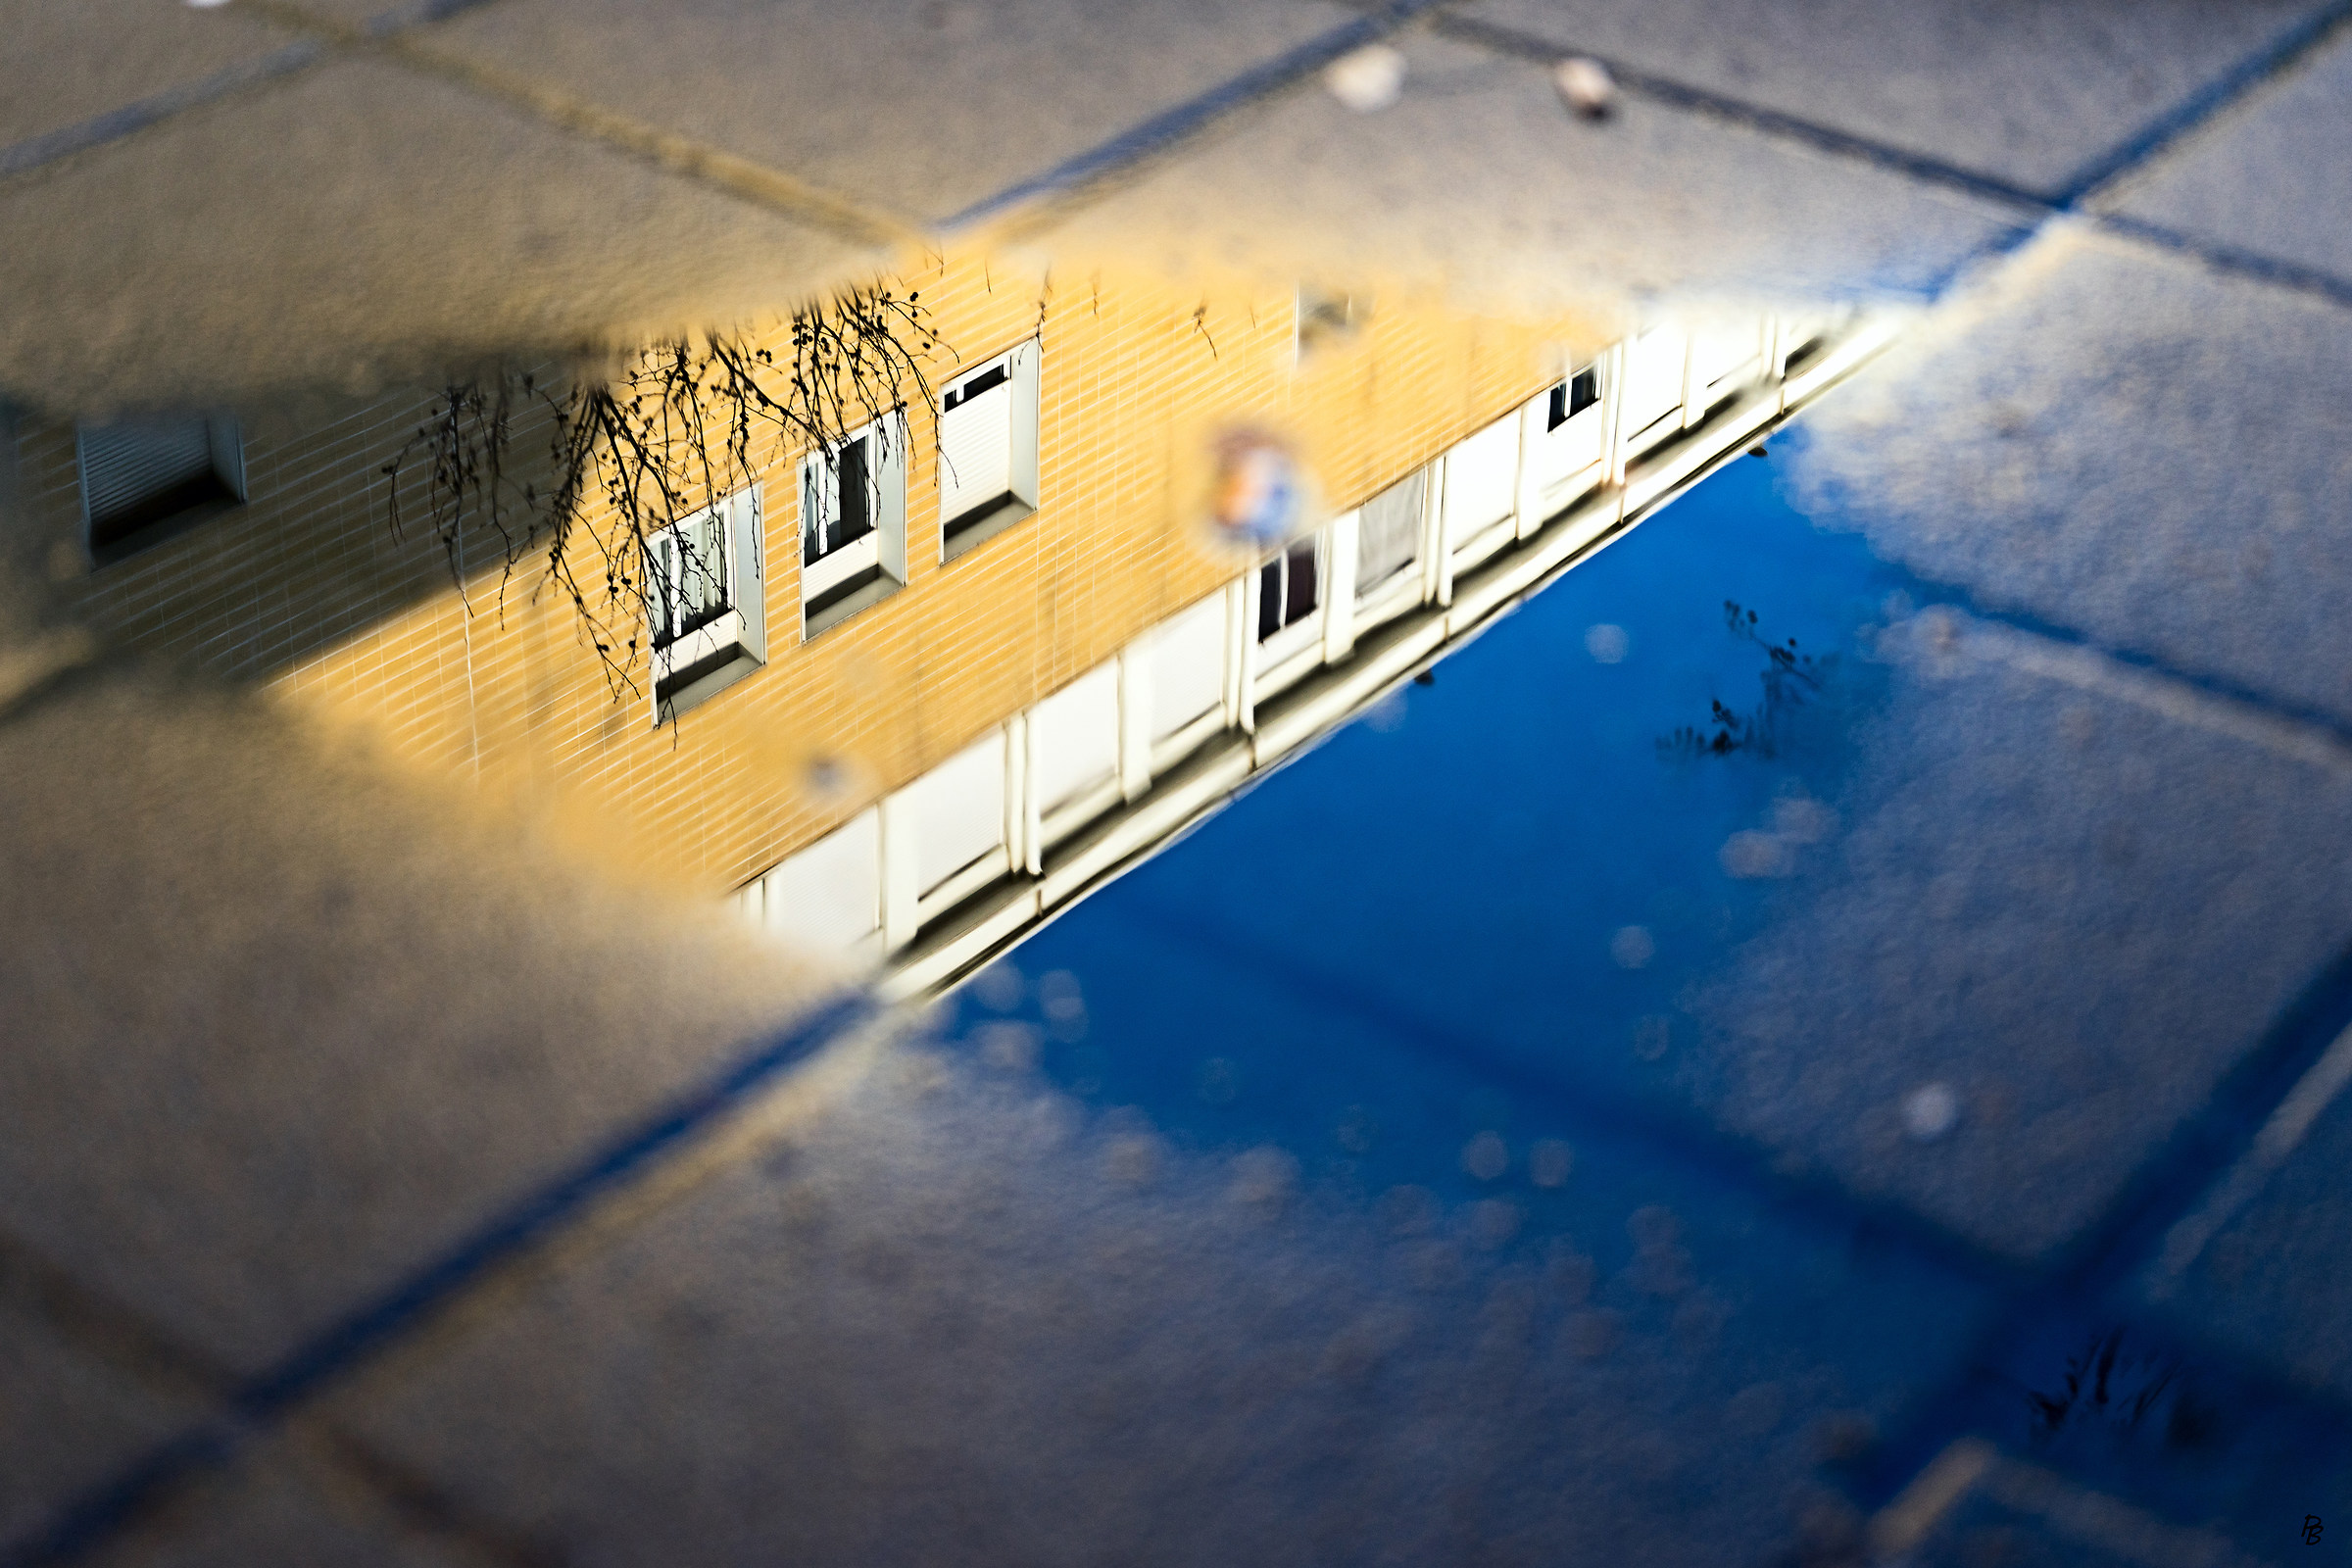 Maths in a puddle...